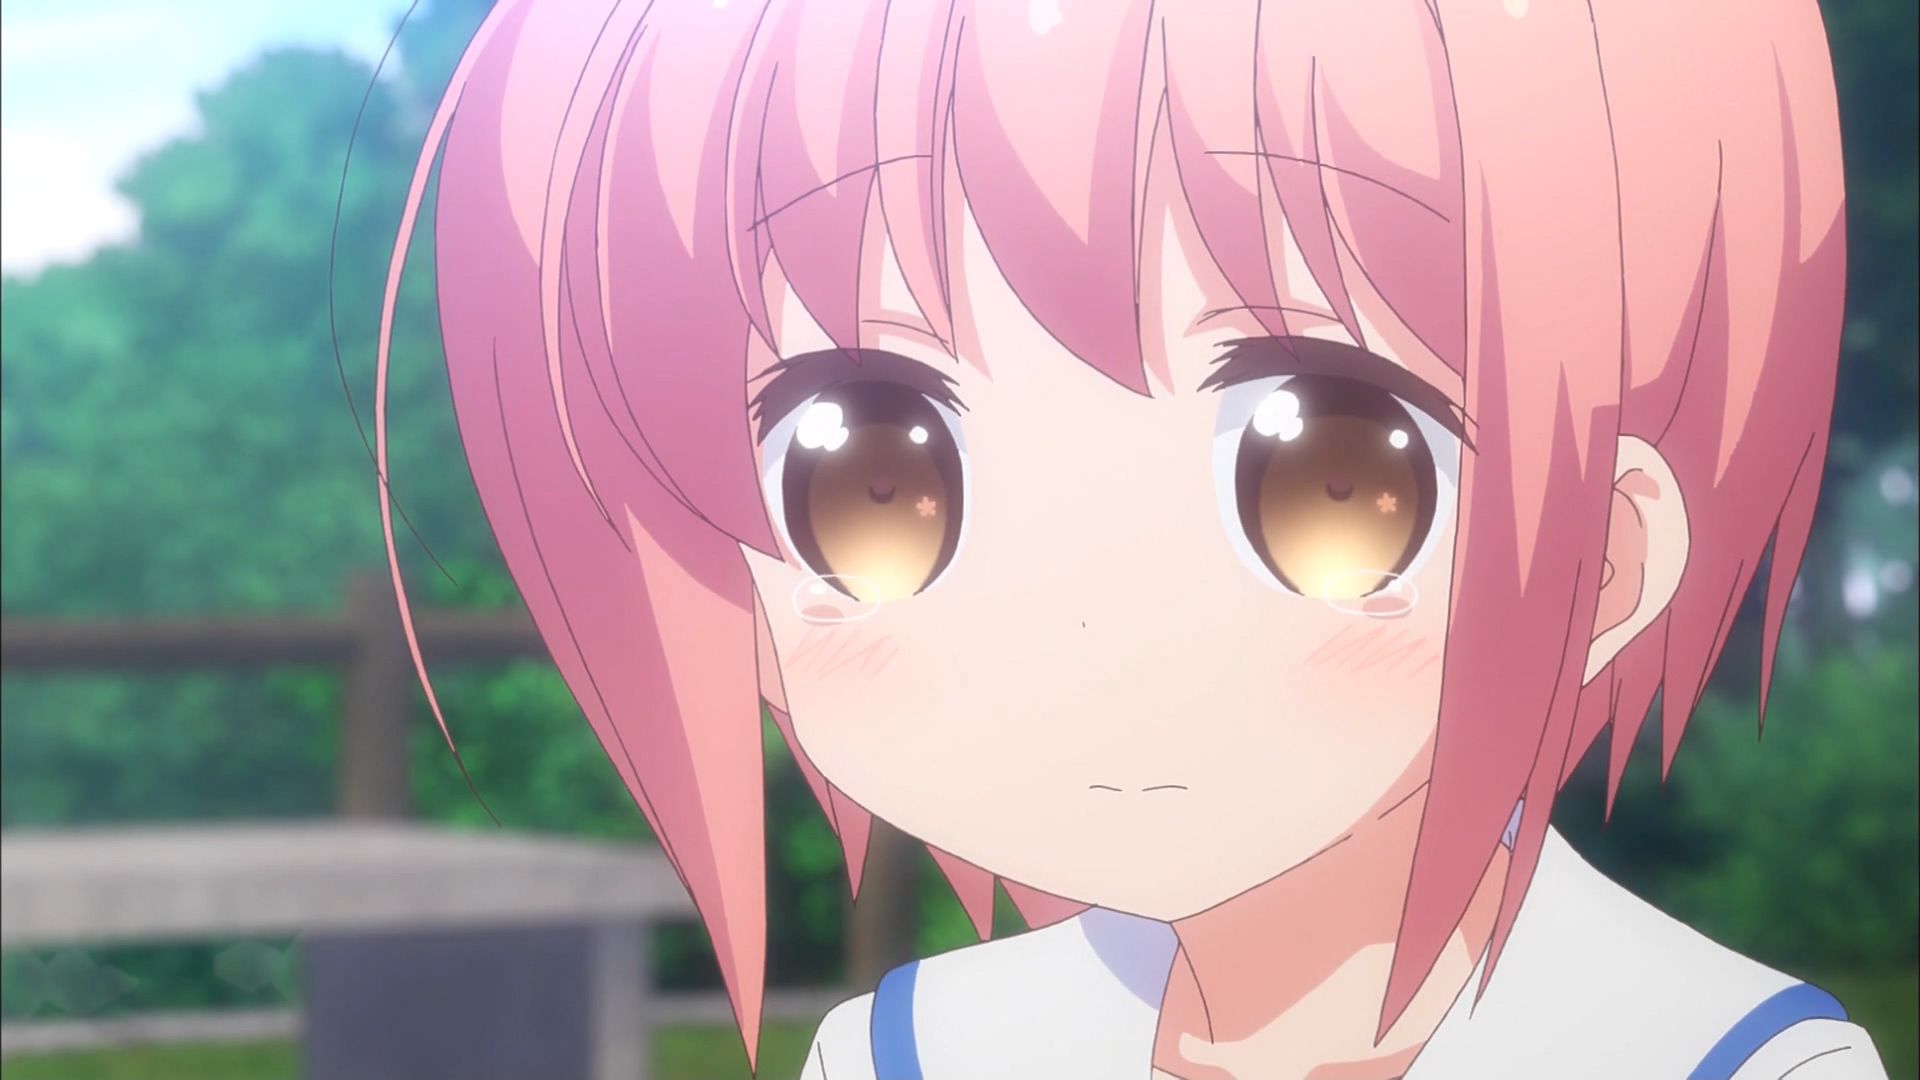 Wwwwwwww Speaking of the cutest character in the two-dimensional world pink hair character 7